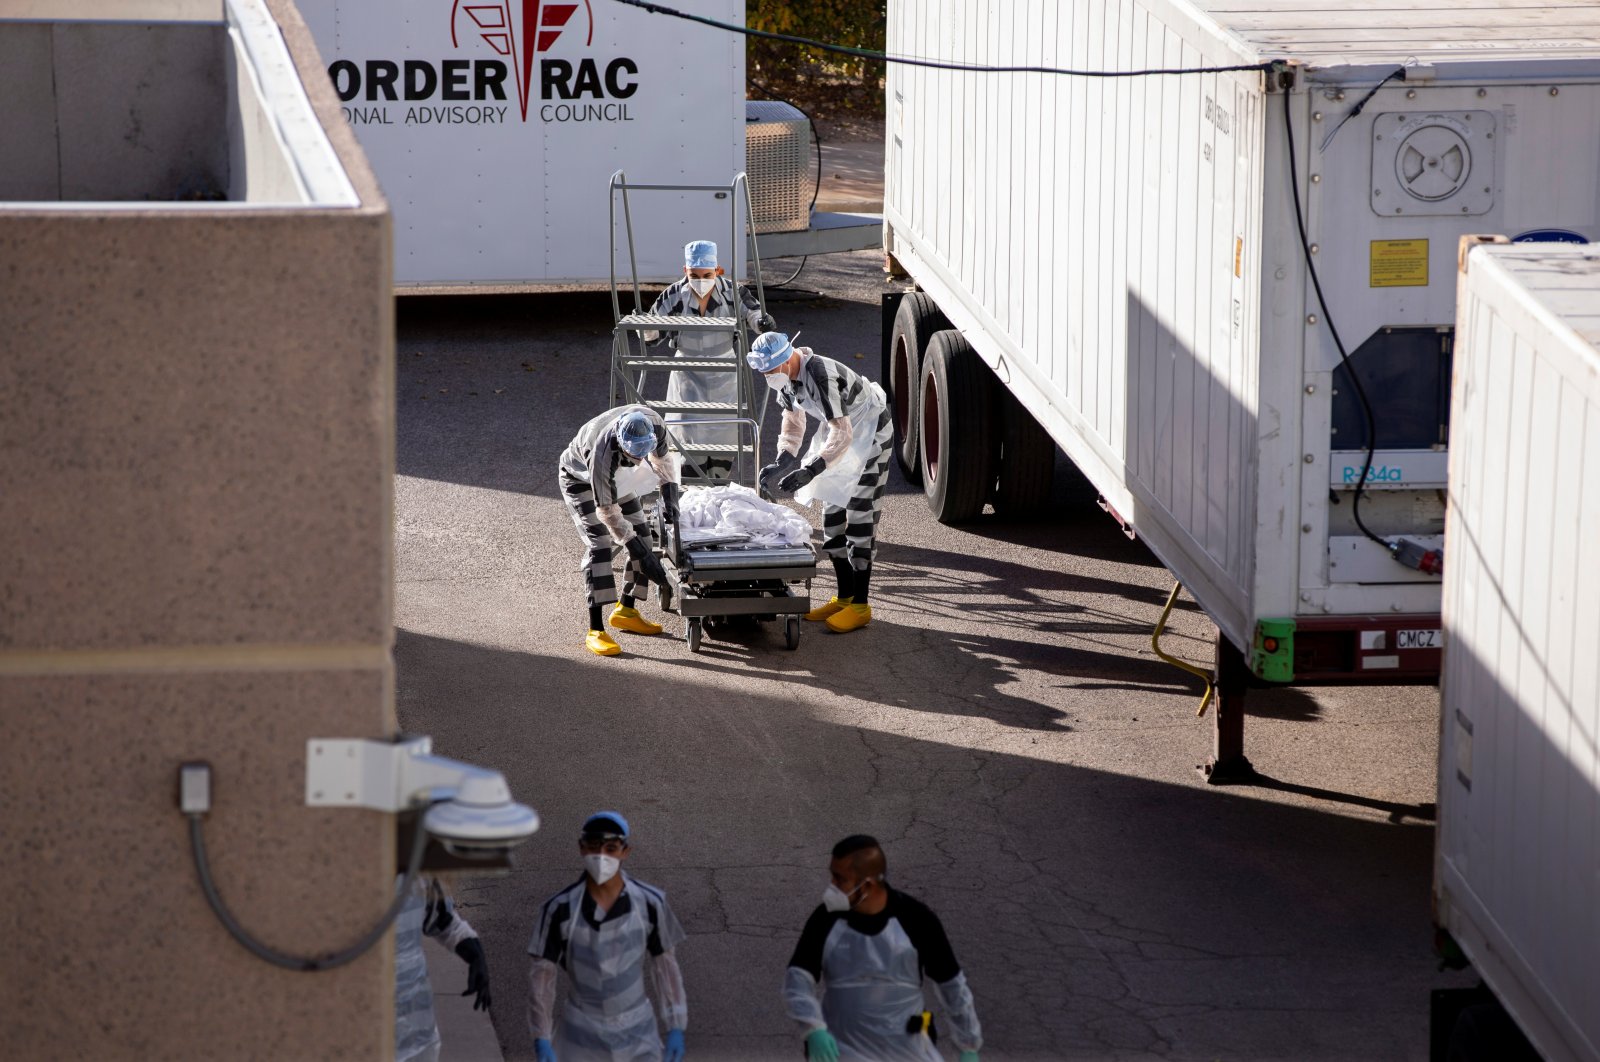 El Paso County detention inmates, also known as trustees (low-security inmates) help move bodies to refrigerated trailers deployed during a surge of COVID-19 deaths, outside the Medical Examiner's Office in El Paso, Texas, U.S. Nov. 14, 2020.  (Reuters Photo)